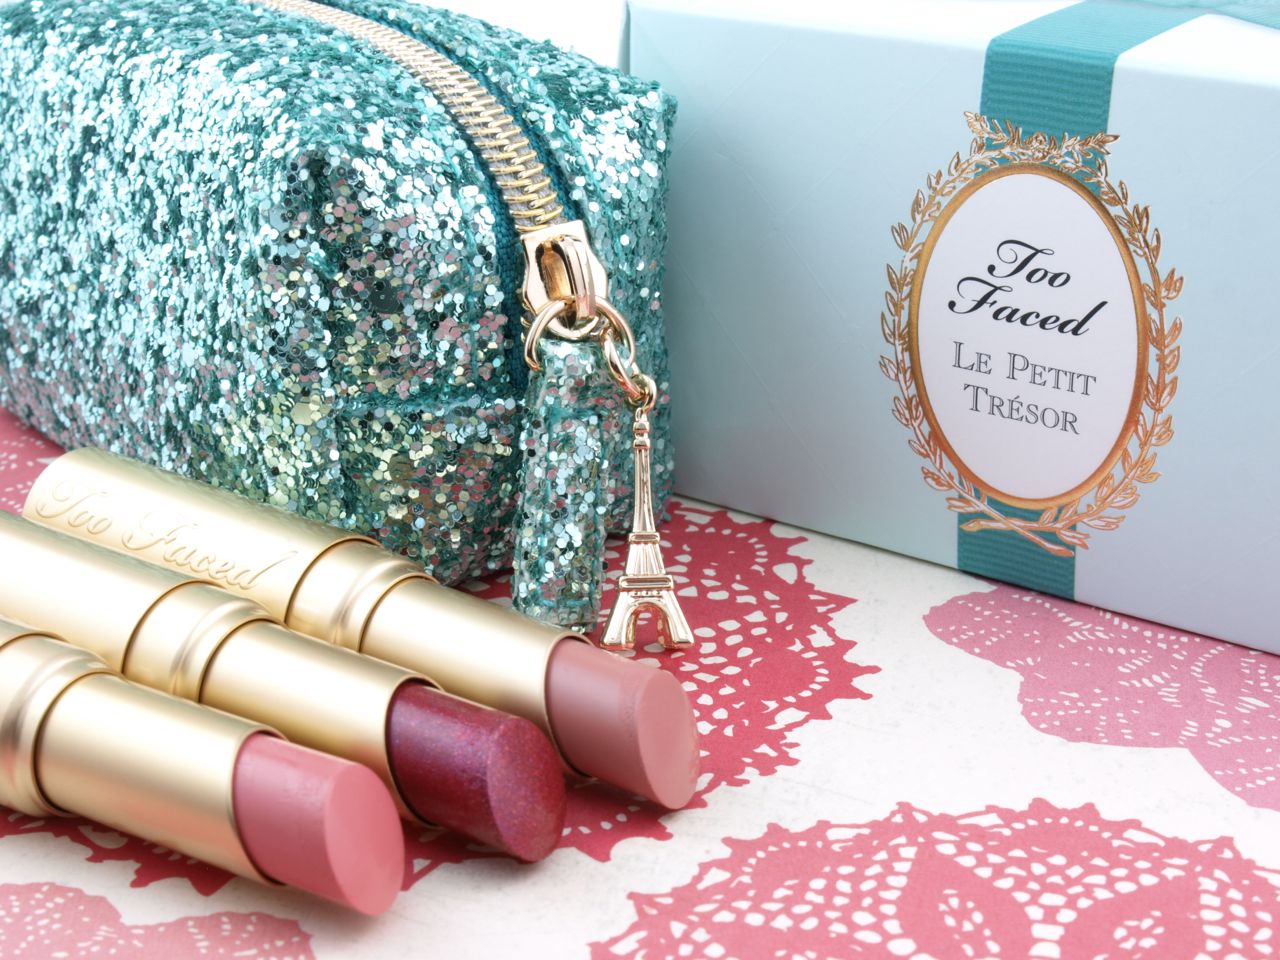 Too Faced Holiday 2015 Le Petit Tresor Set: Review and Swatches  The Happy  Sloths: Beauty, Makeup, and Skincare Blog with Reviews and Swatches